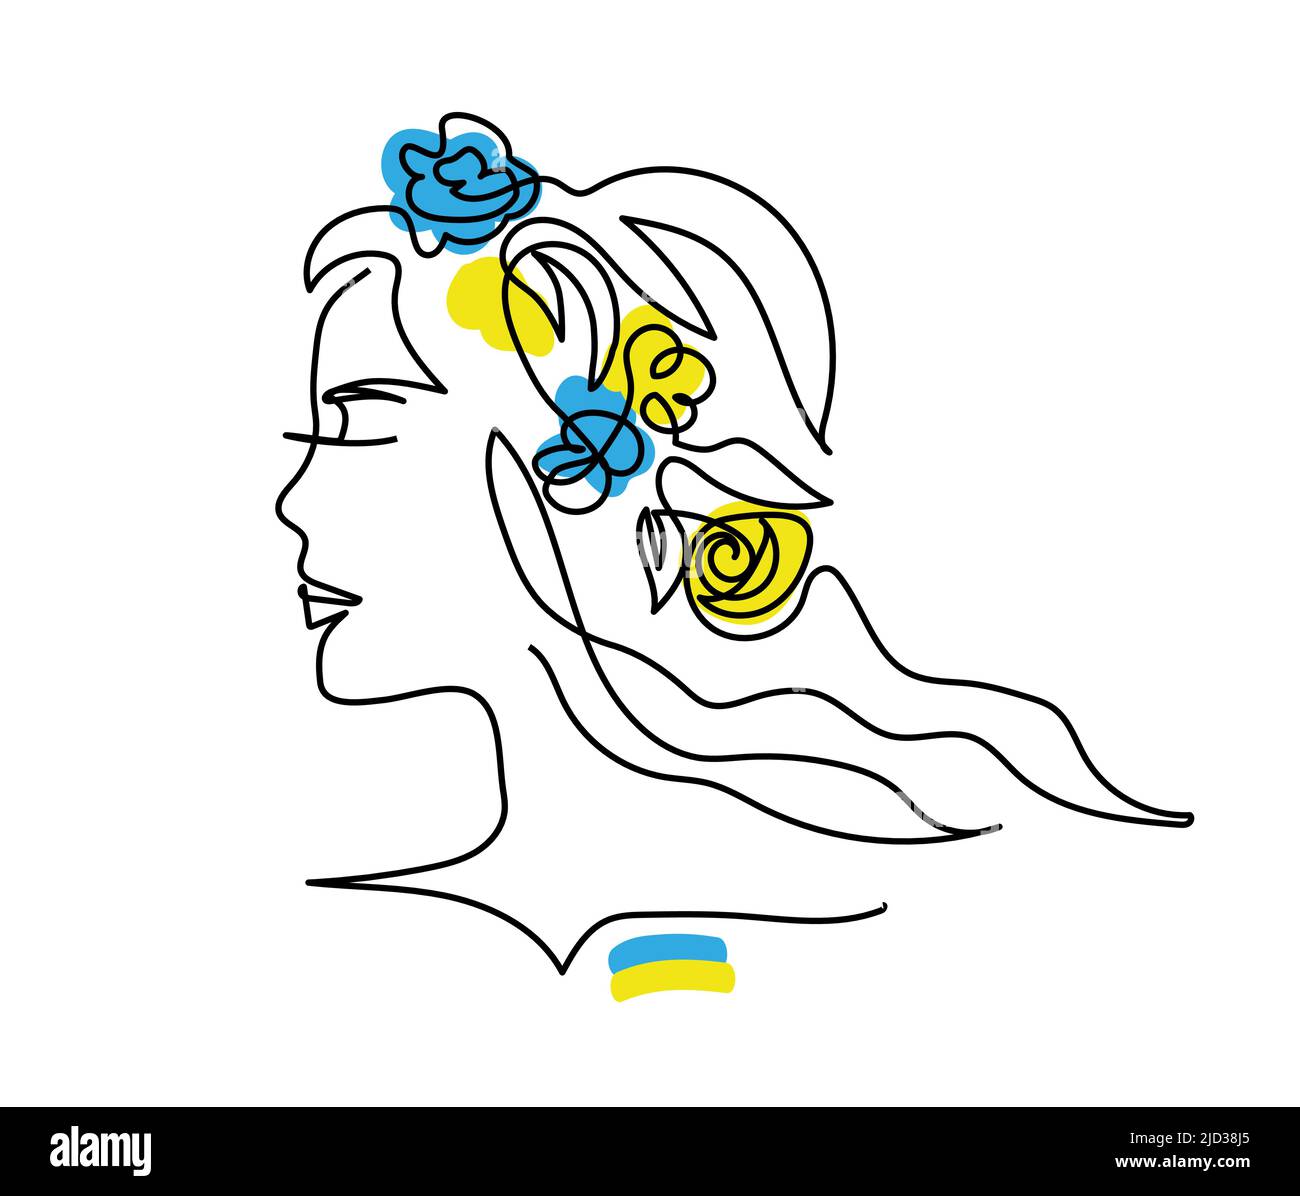 Head in flowers. Ukrainian flag. Blue and yellow flowers in head vector. Woman profile. One continuous line art drawing Stock Vector